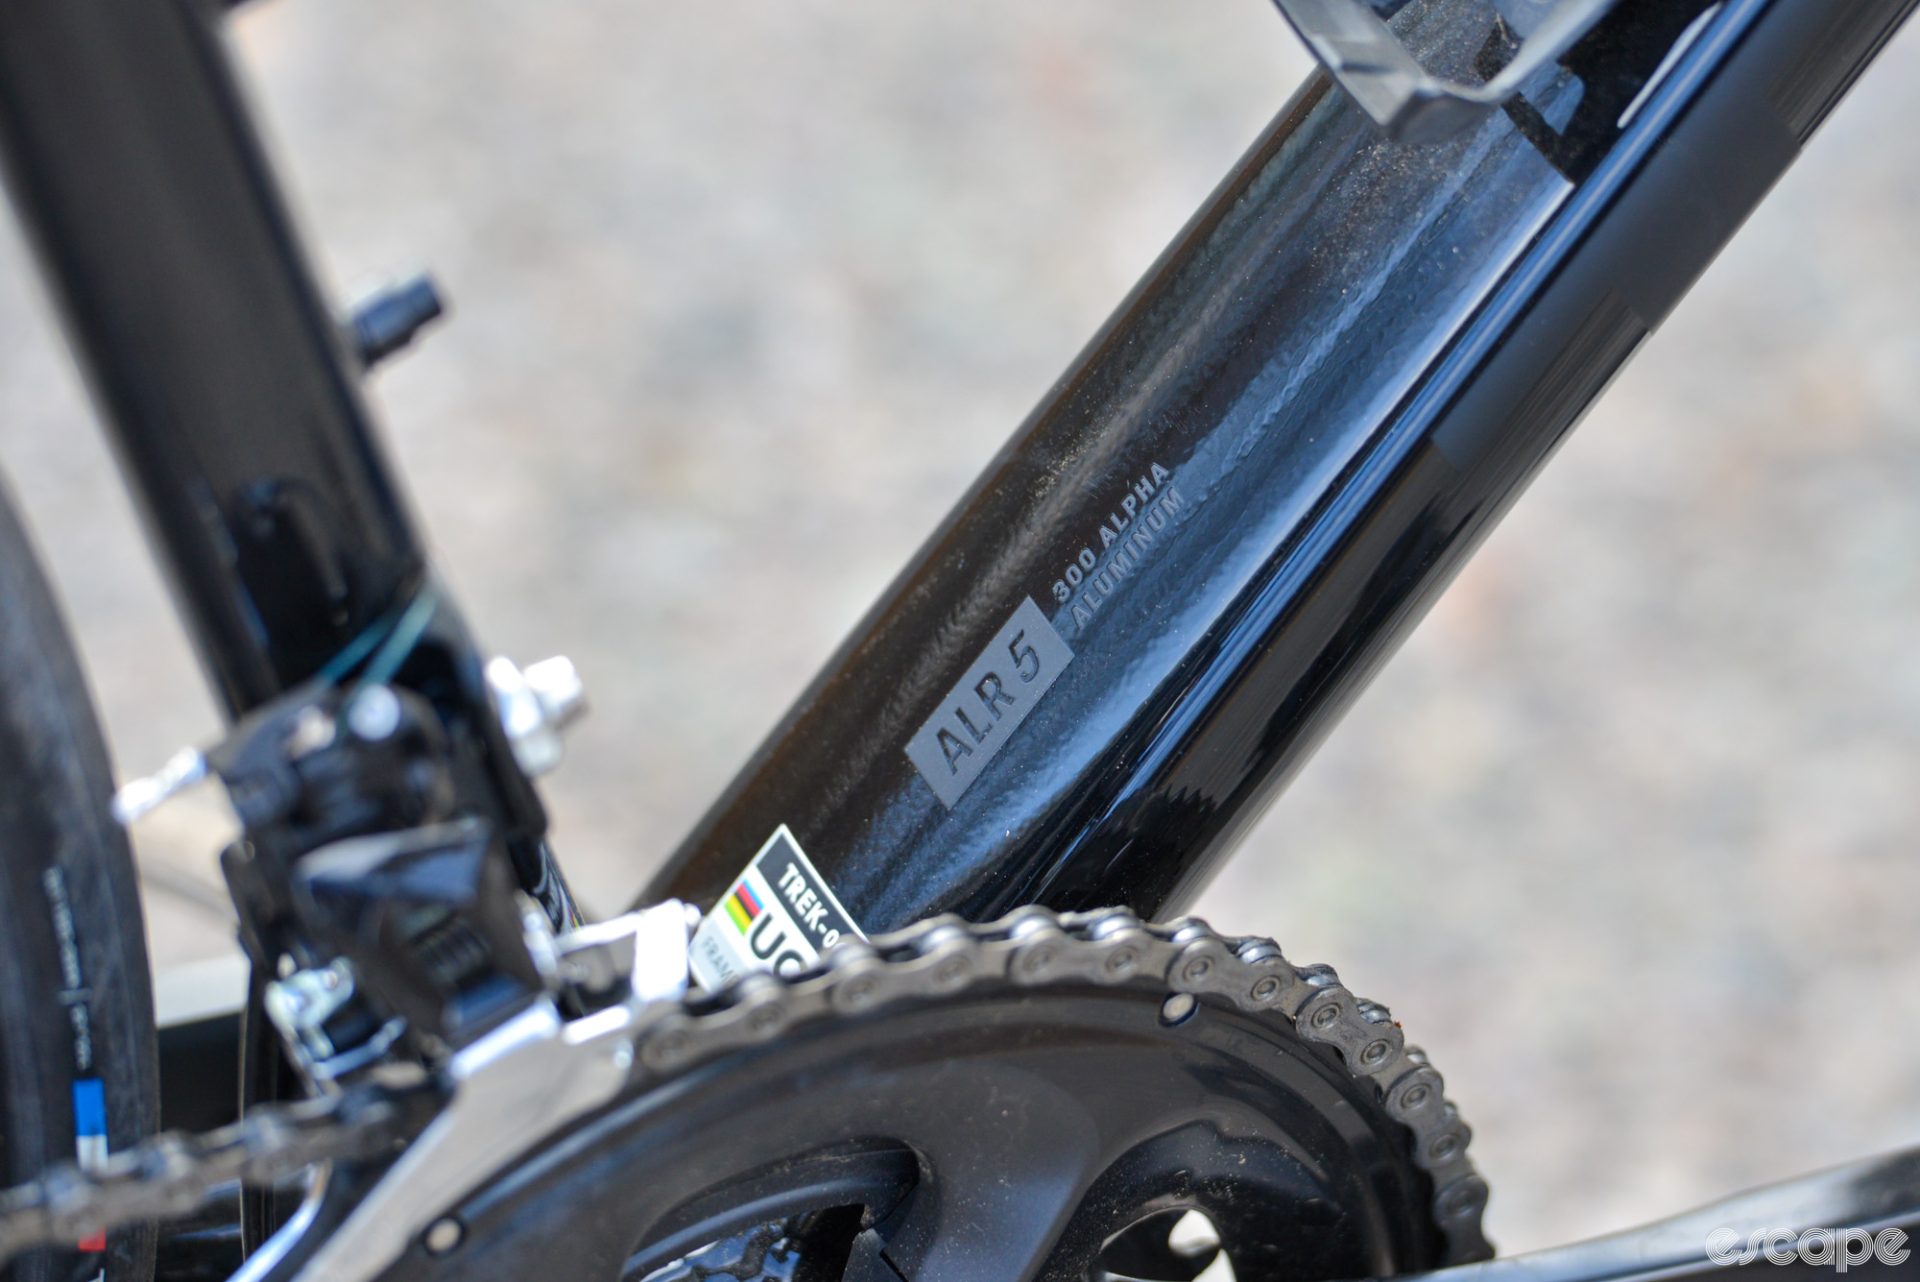 The chunky, wide downtube, with a 300 Alpha Aluminum decal and a UCI-approved sticker.